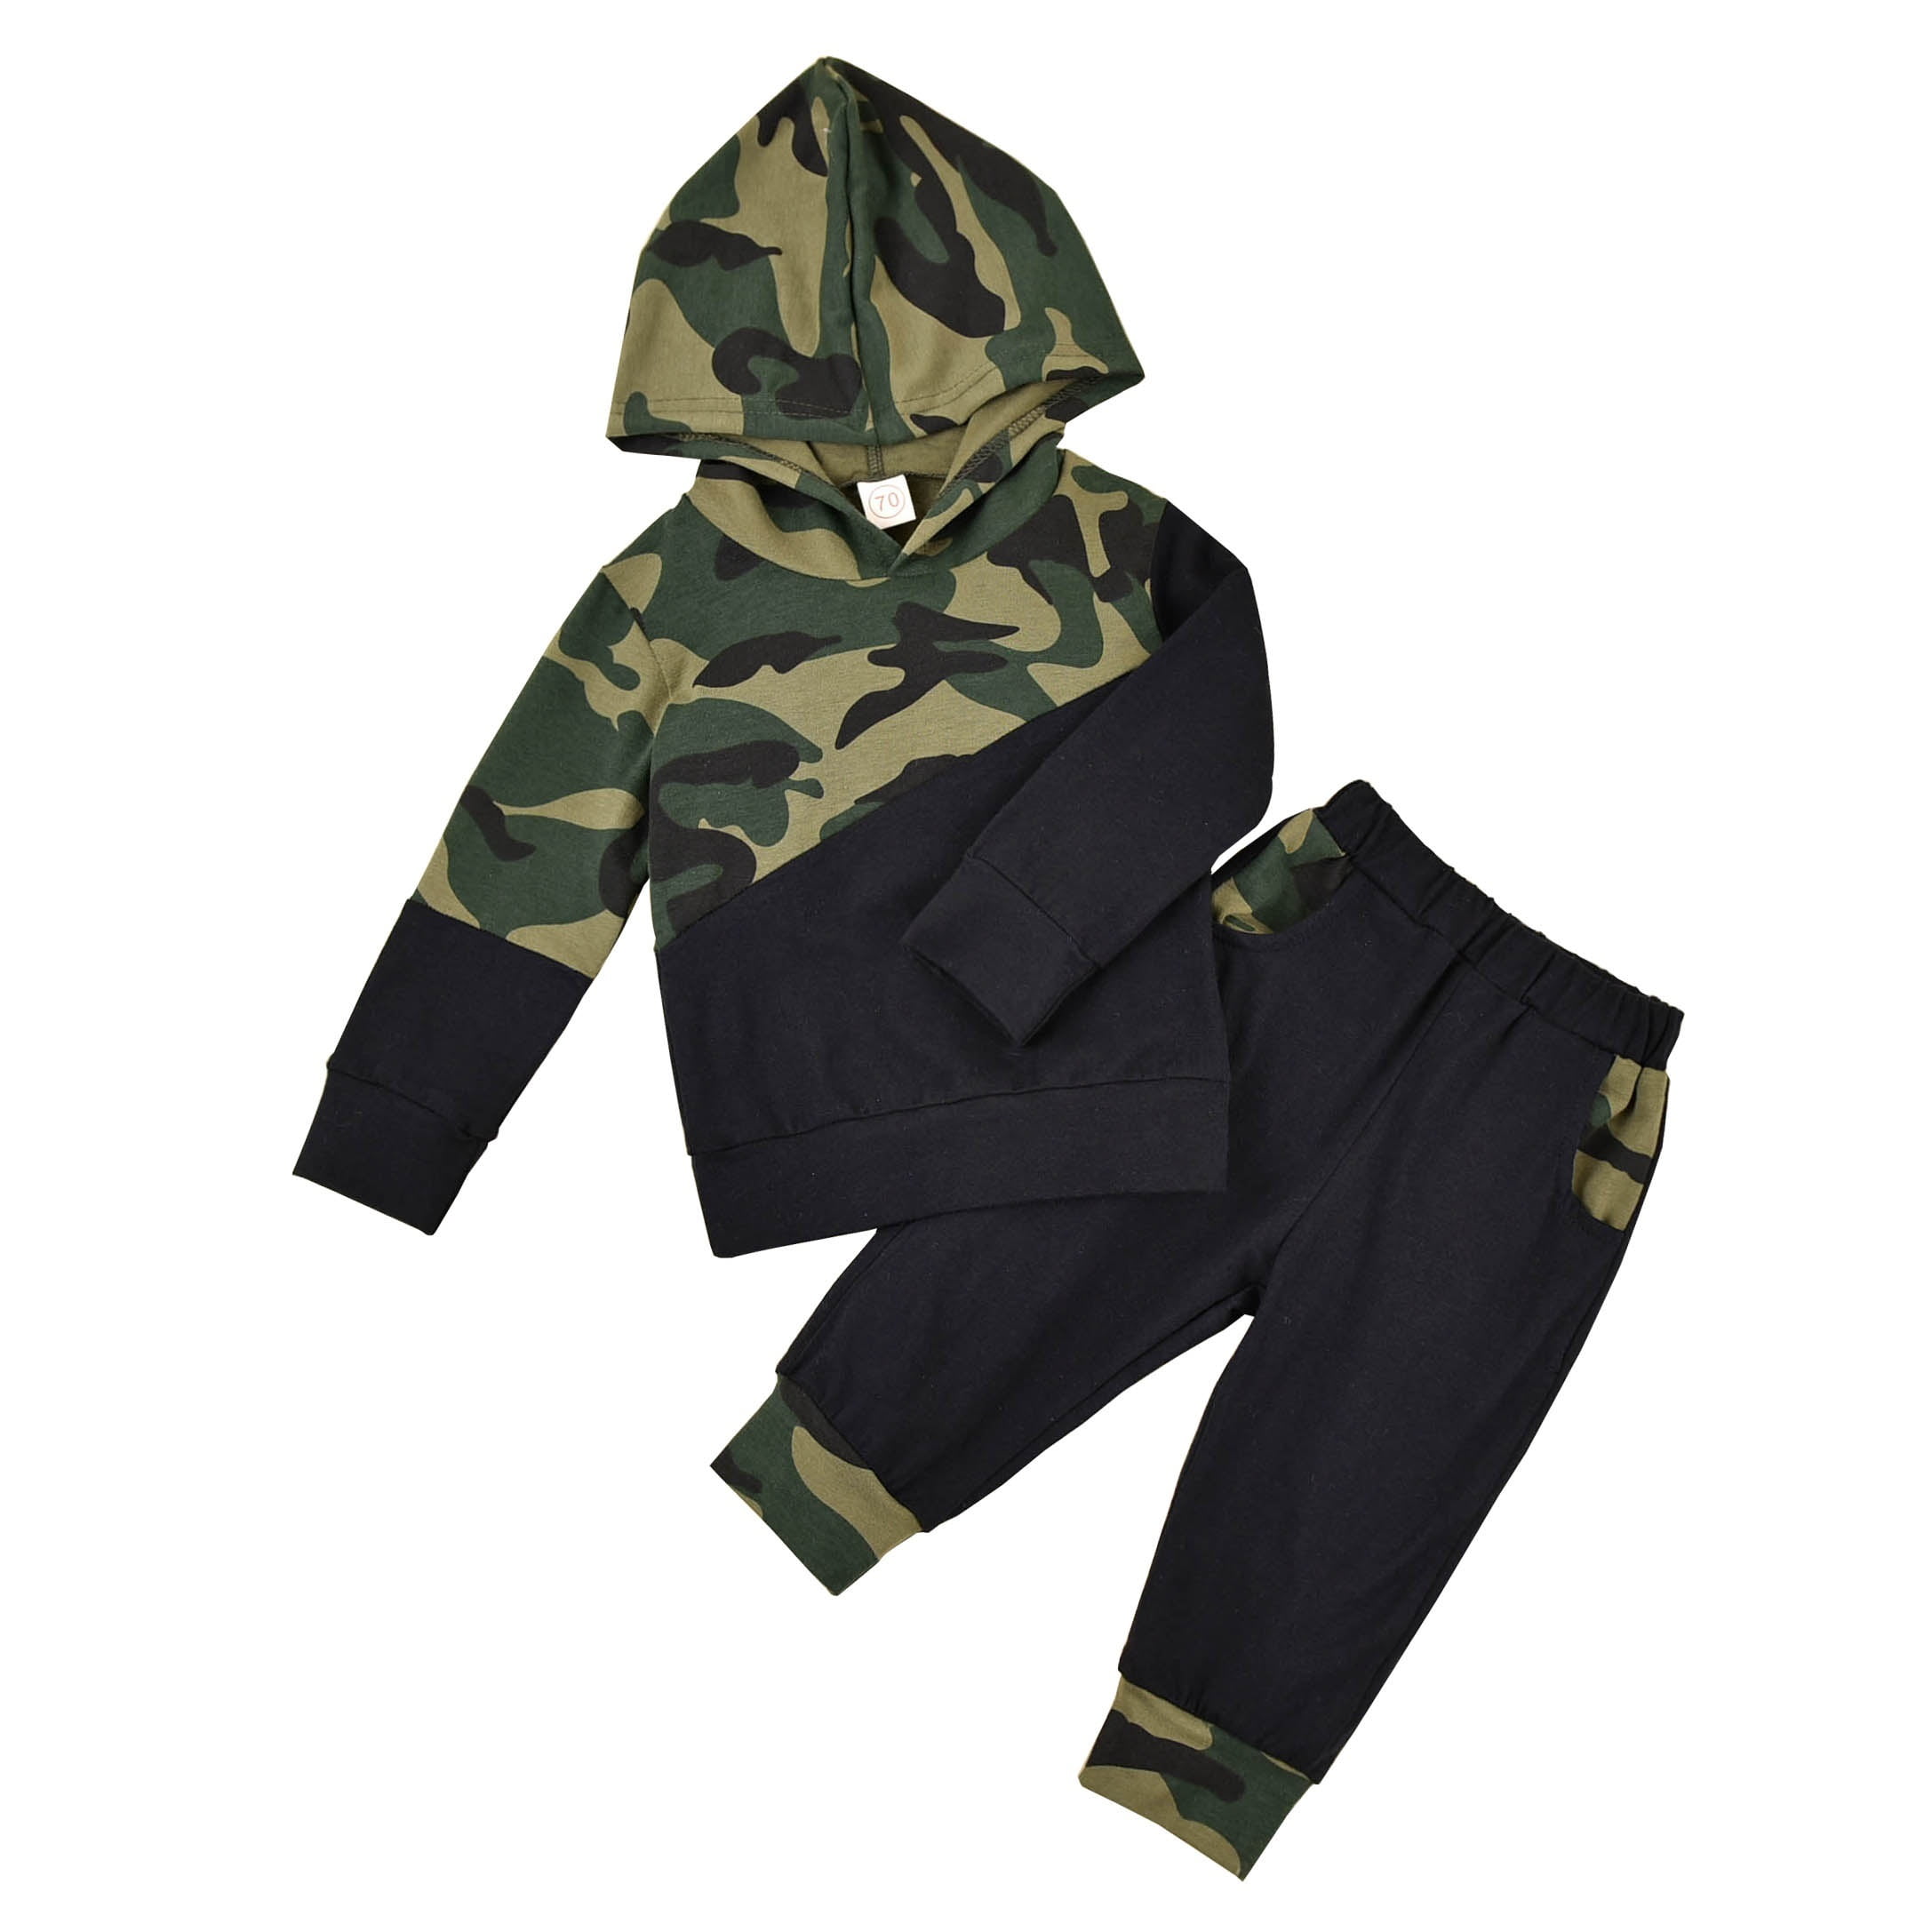 Infant Toddler Boys Camouflage Outfits Suits, Long Sleeve Hooded ...